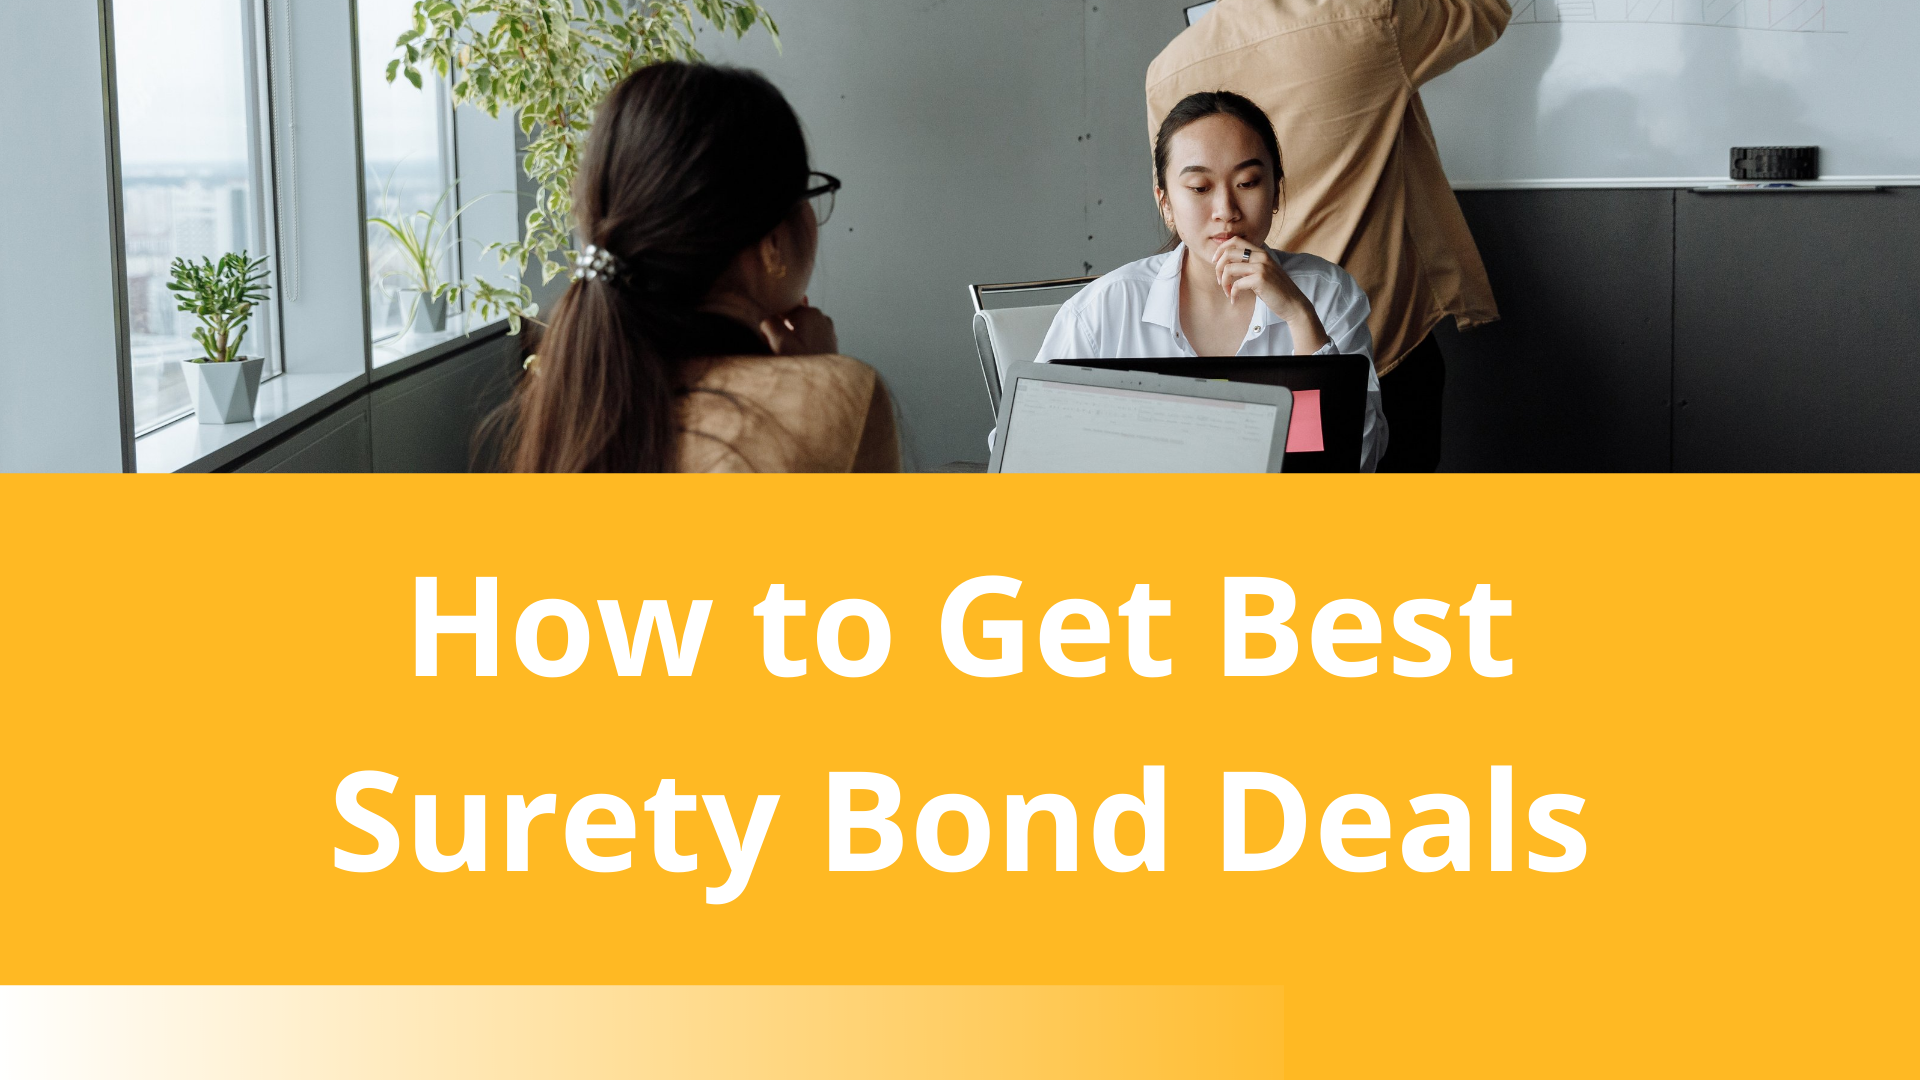 surety bond - How do you go about securing a surety bond